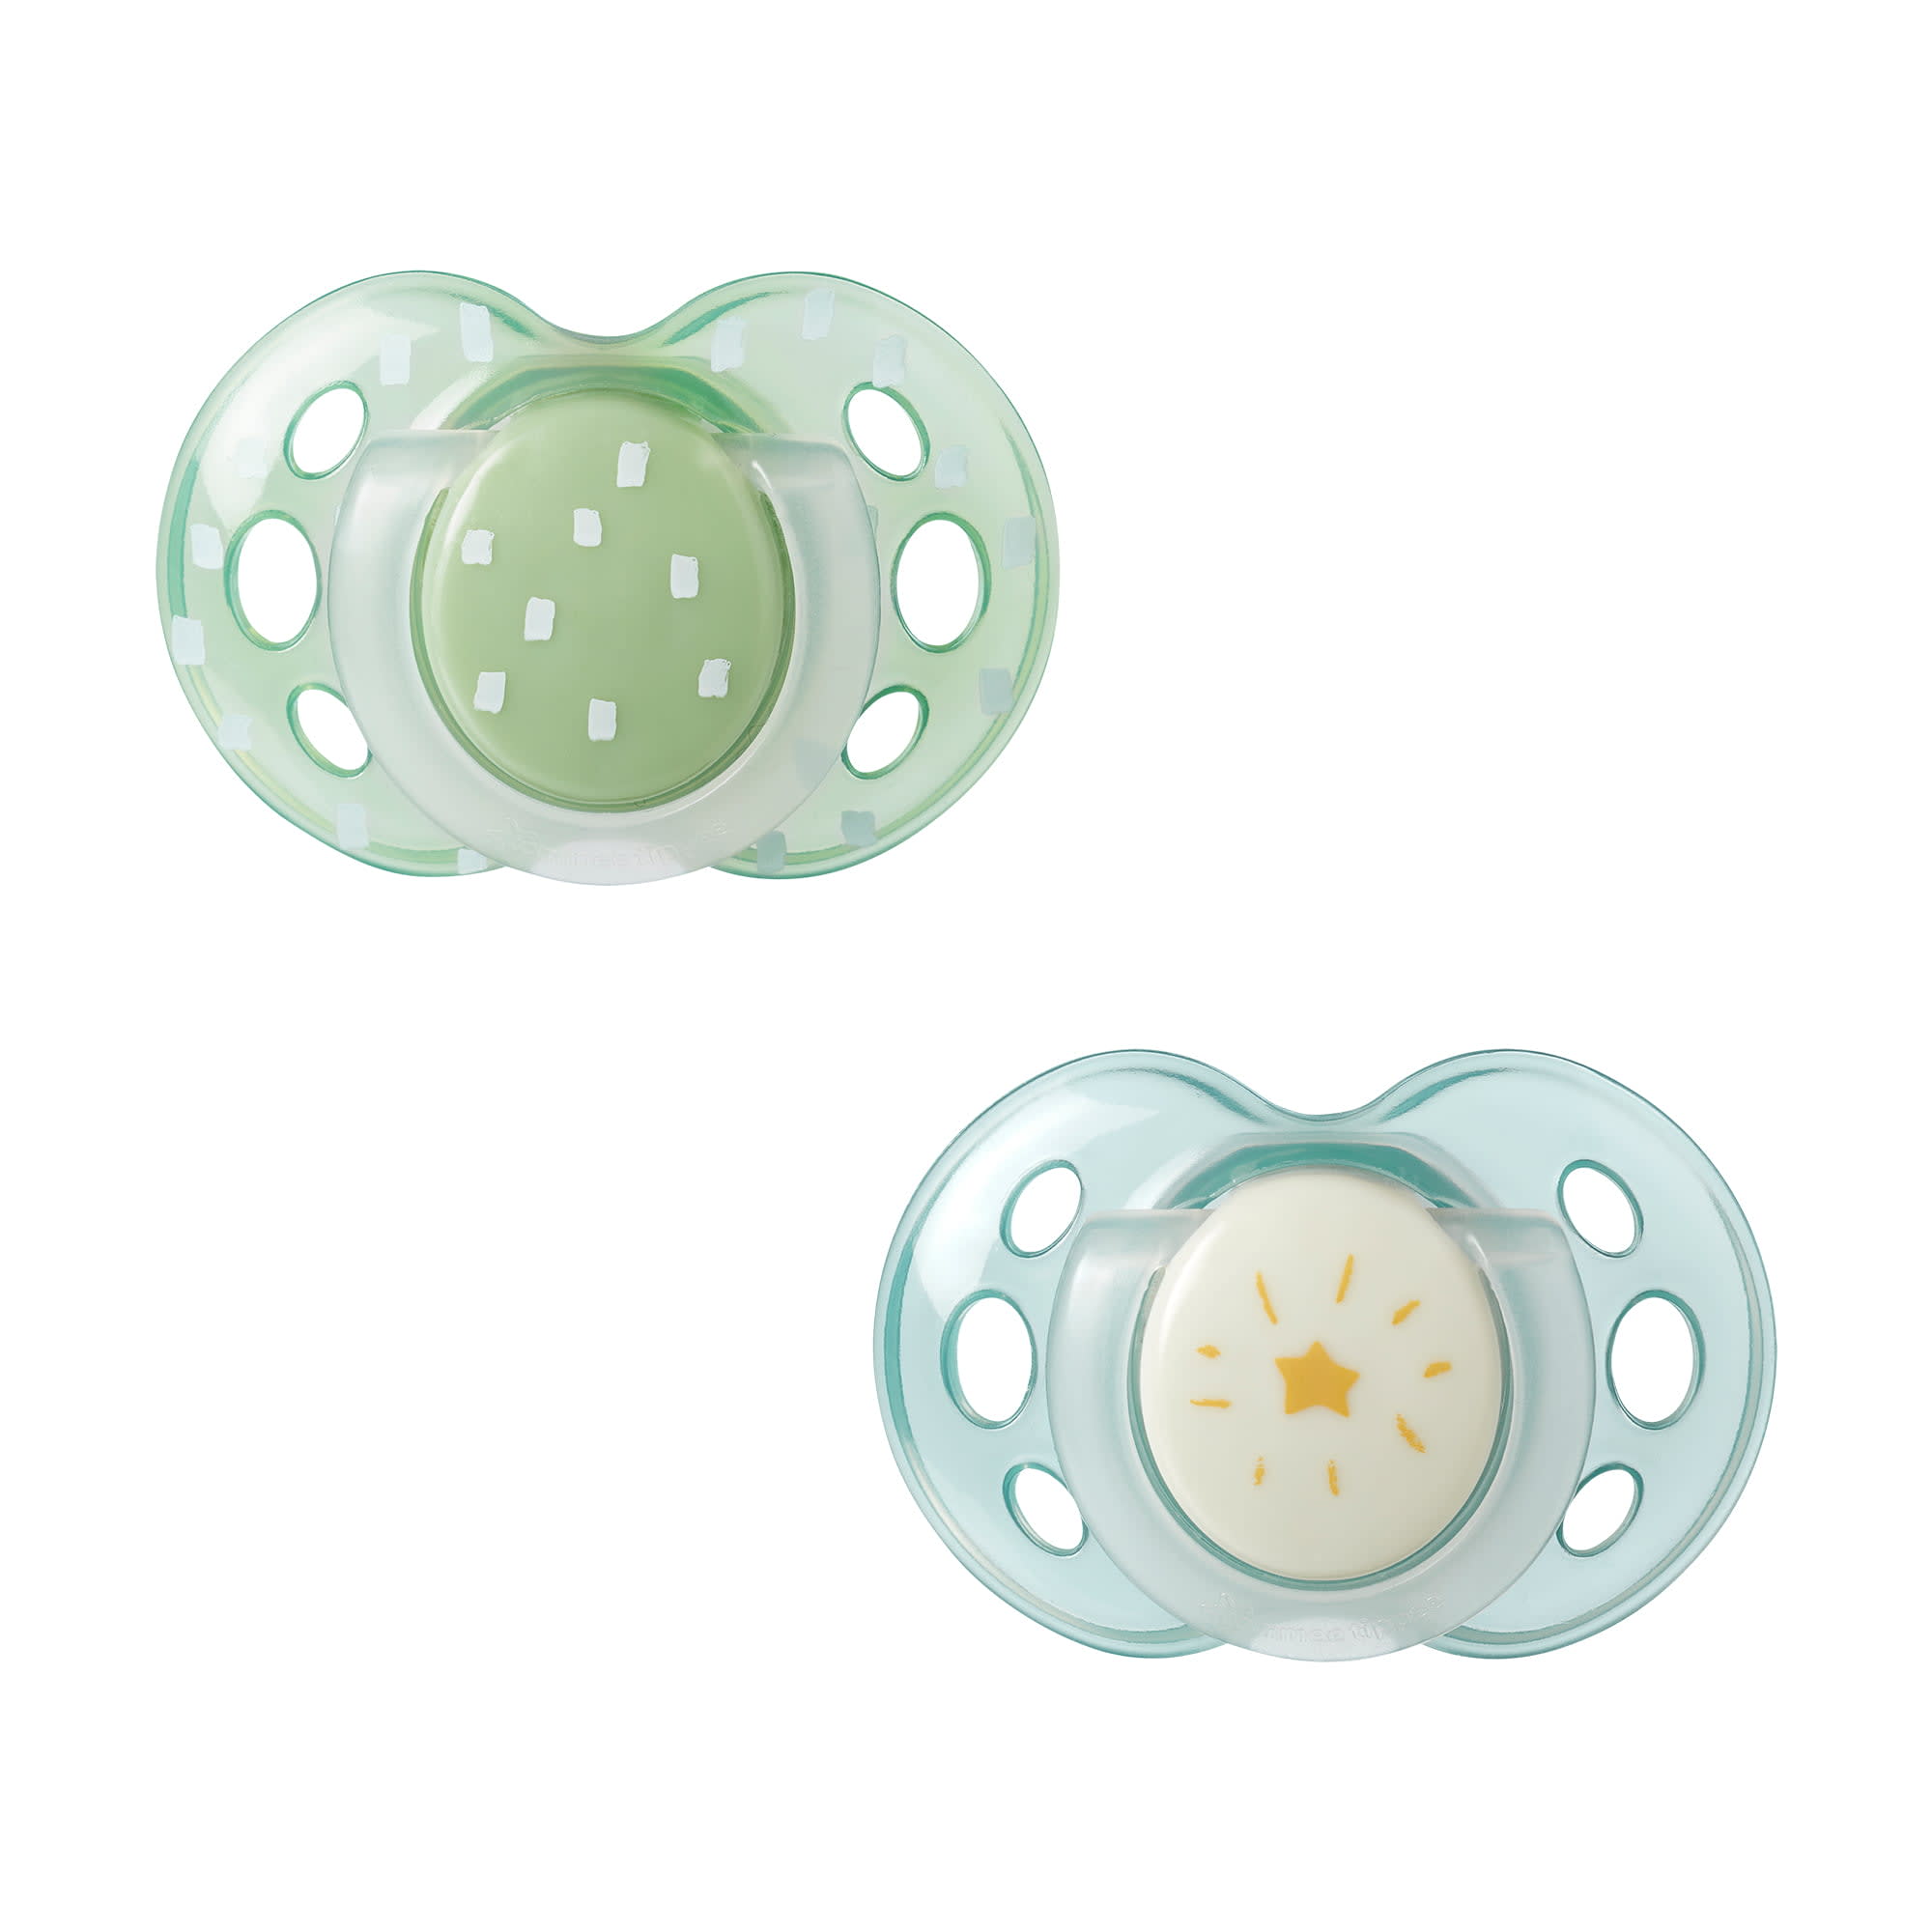 MAM Perfect Night Pacifier, 16+ Months, Unisex, 2 Pack